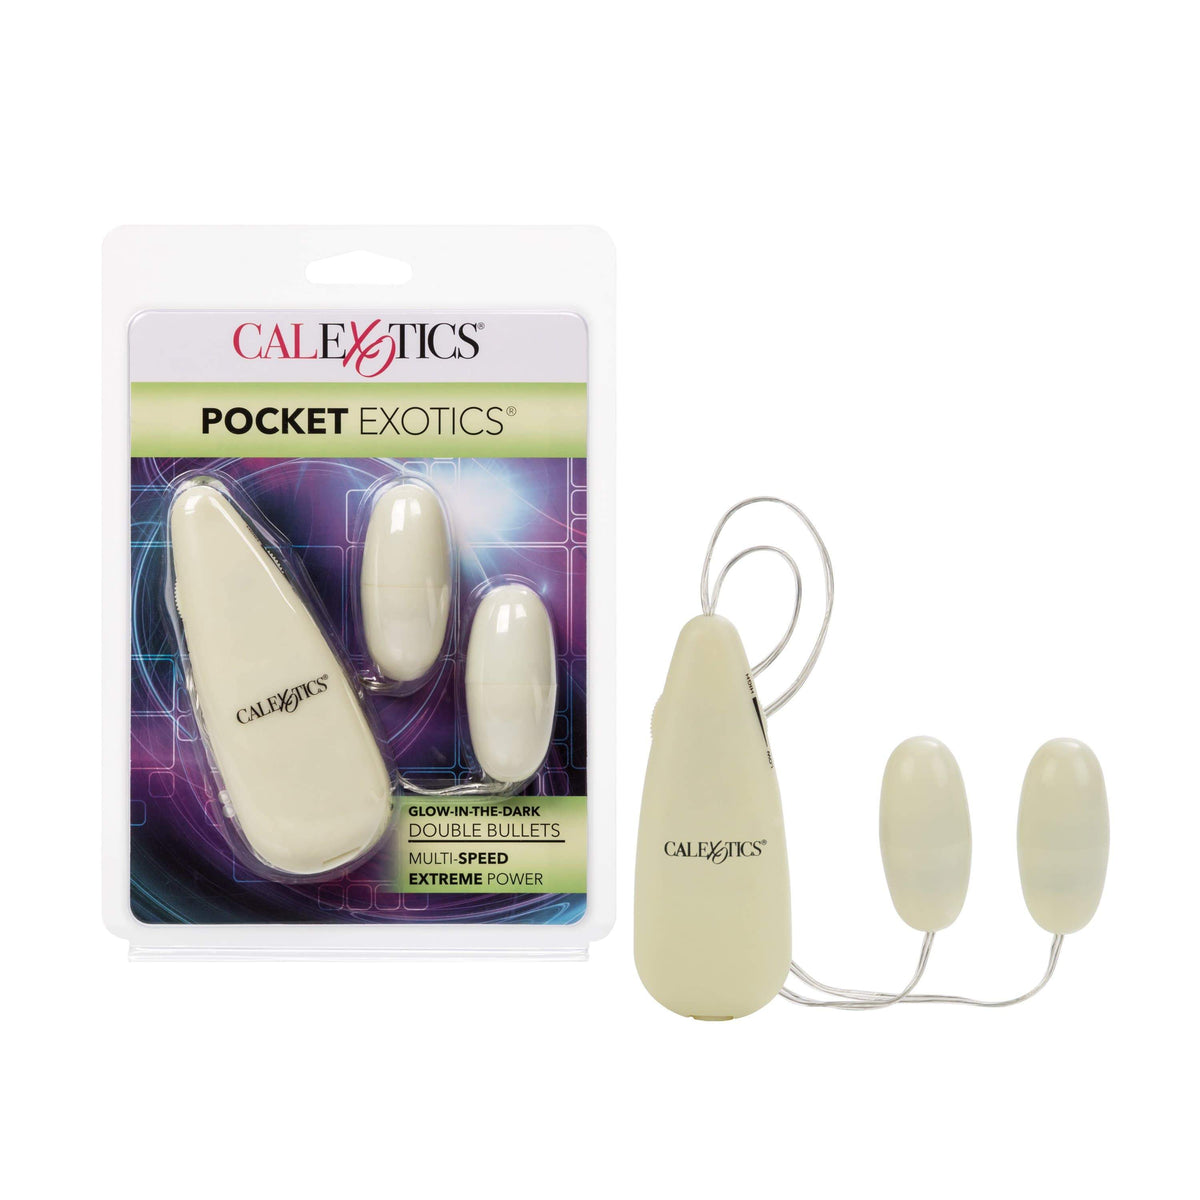 California Exotics - Pocket Exotics Glow In The Dark Double Bullets Vibrator (Green) Wired Remote Control Egg (Vibration) Non Rechargeable Durio Asia